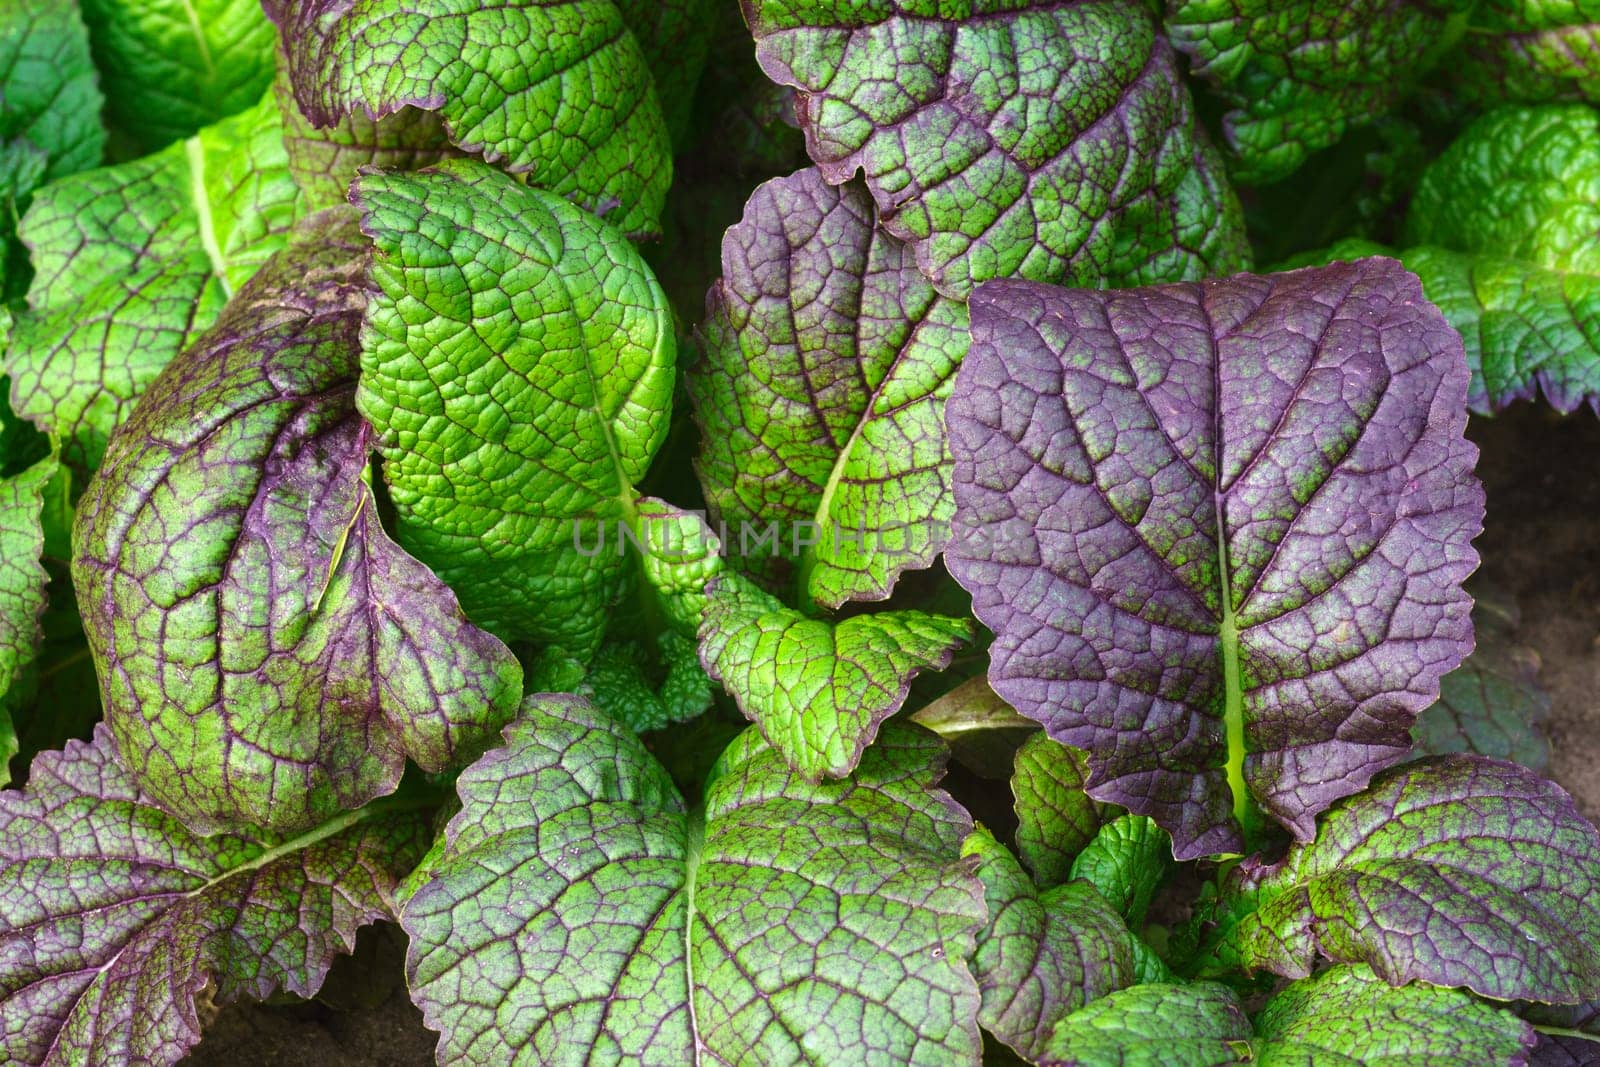 Mustard greens are one of the popular leaf vegetables harvested mustard greens in garden.